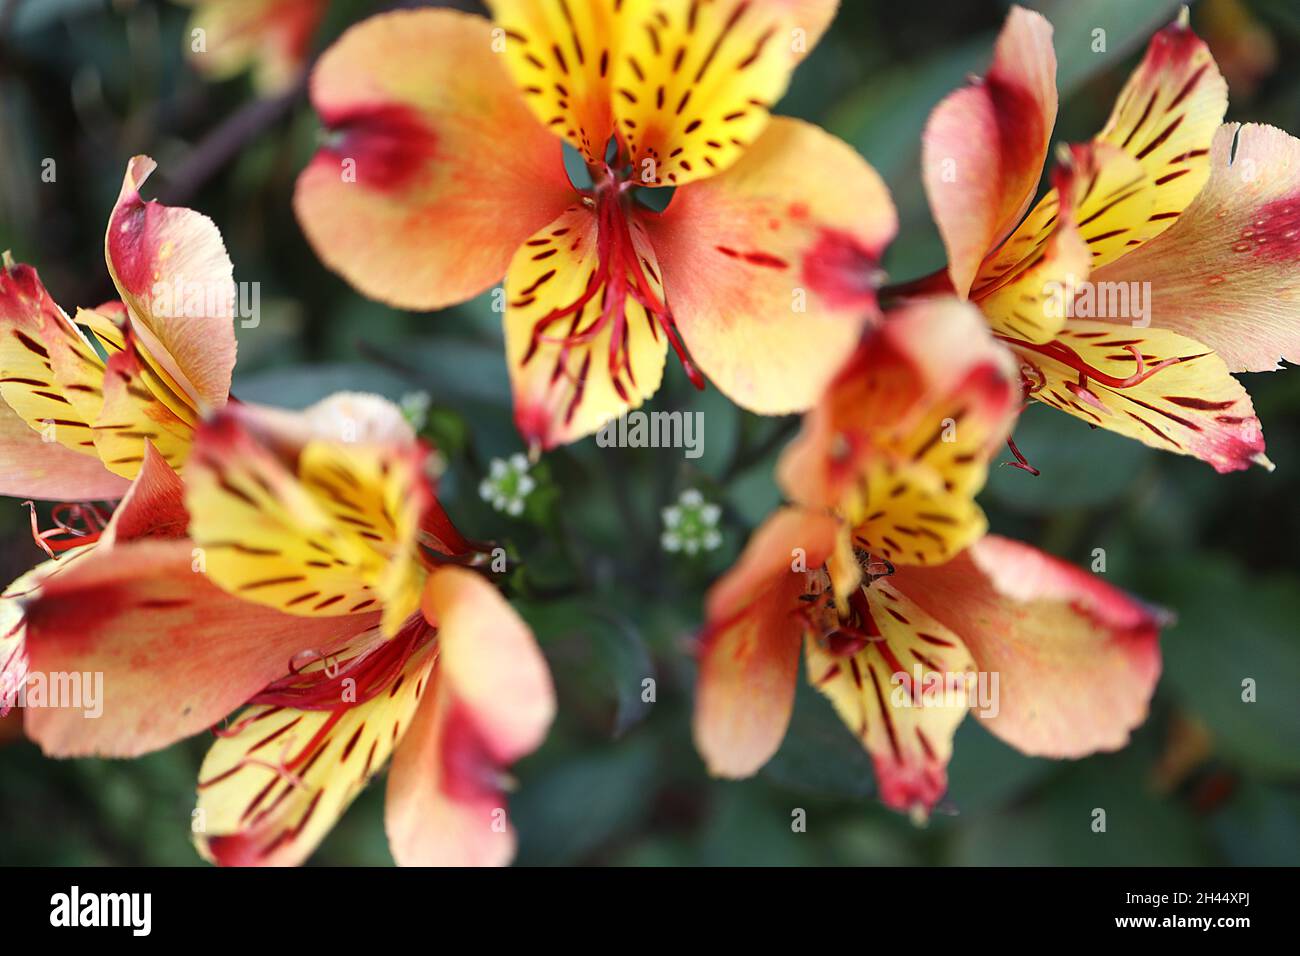 Alstroemeria ‘Indian Summer’ Peruvian lily Indian Summer – orange funnel-shaped flowers with yellow wash, deep pink stripes and brown flecks,  October Stock Photo